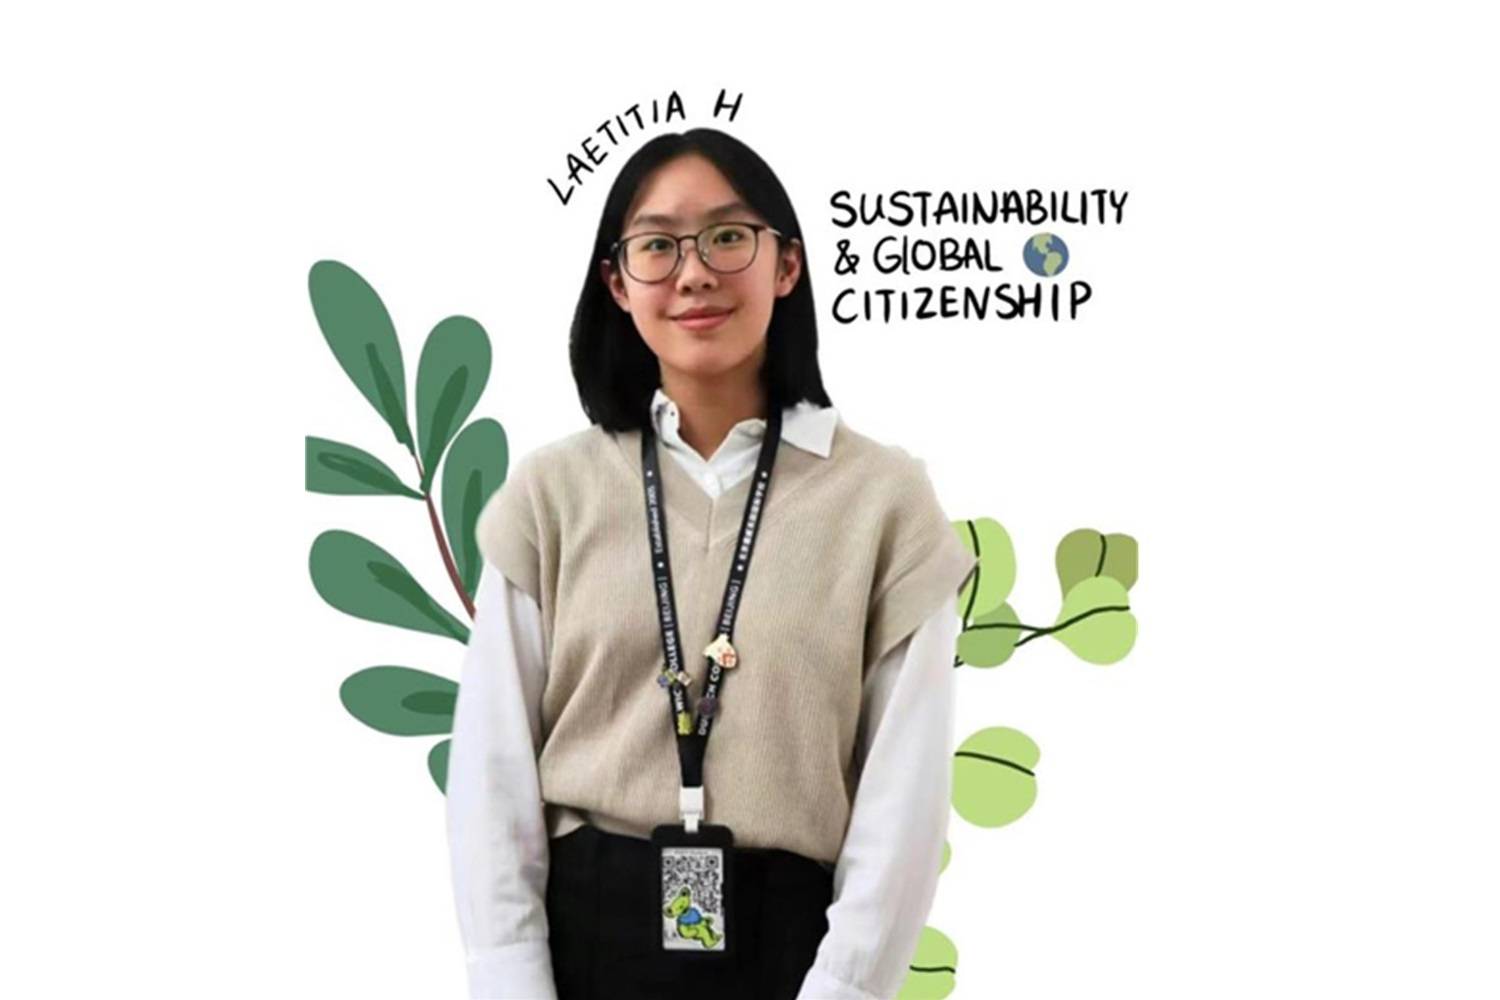 Sustainability and Global Citizenship Prefects: Laetitia H